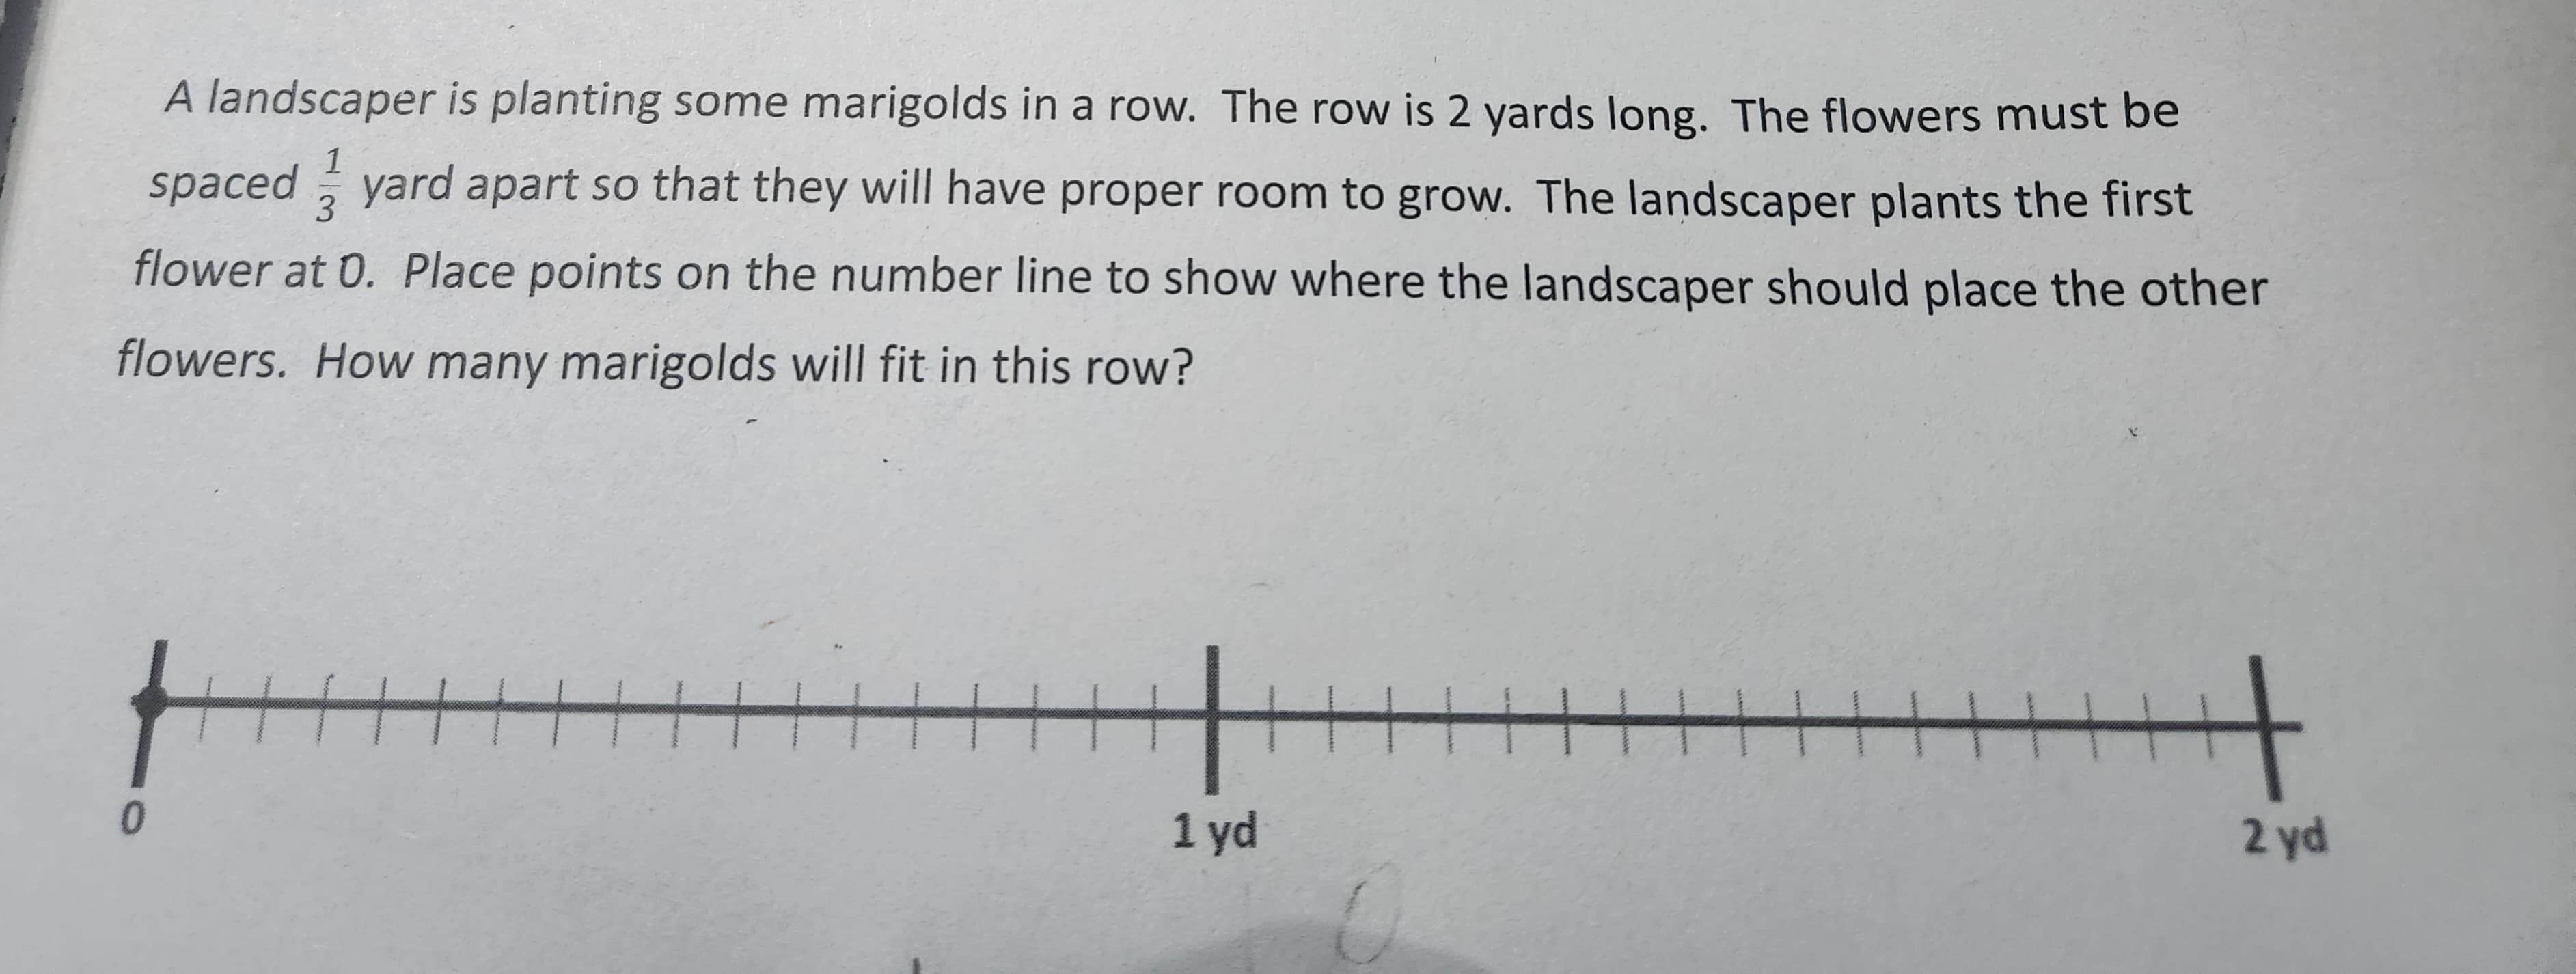 A landscaper is planting some marigolds in a row. The row is 2 yards long. The flowers must be
1
3
spaced yard apart so that they will have proper room to grow. The landscaper plants the first
flower at 0. Place points on the number line to show where the landscaper should place the other
flowers. How many marigolds will fit in this row?
0
HH
1 yd
H H
2 yd